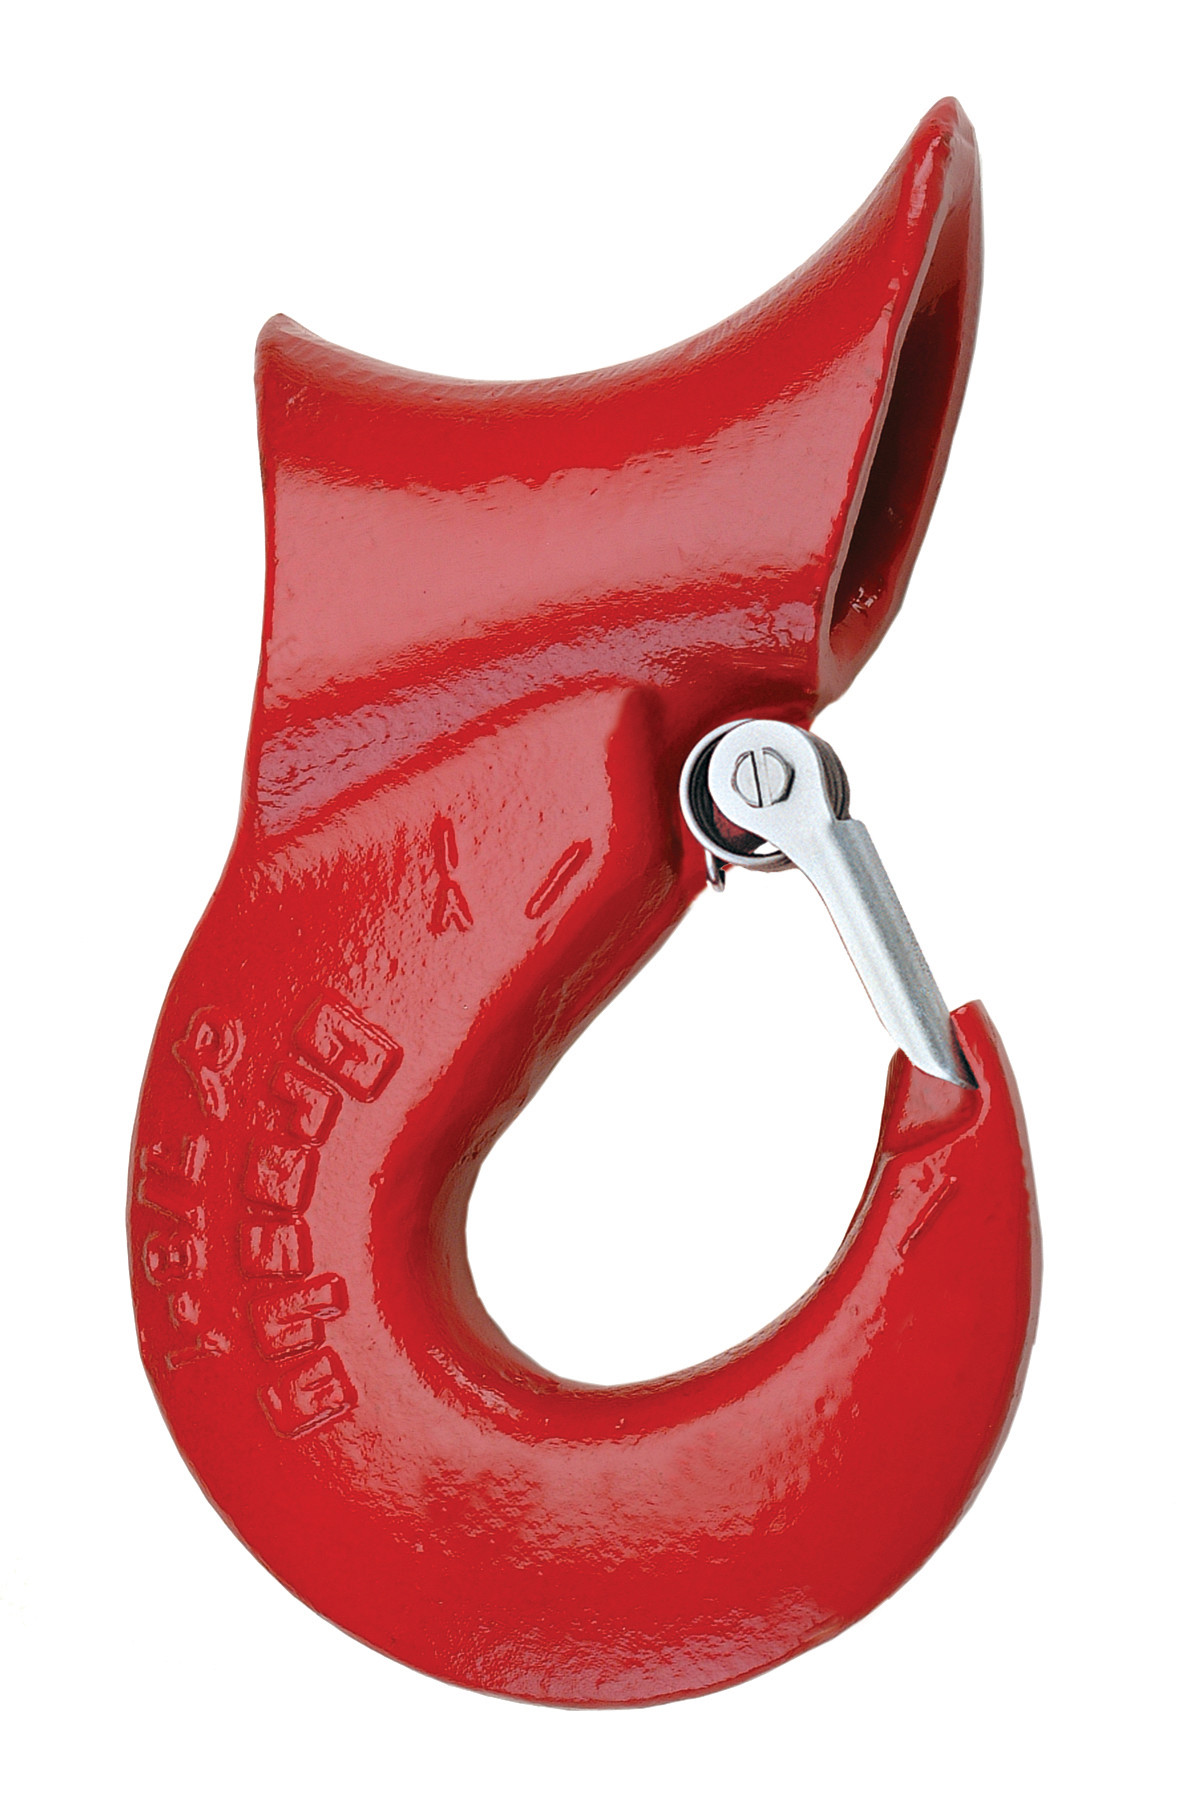 Crosby® A-350L Forged Hooks image